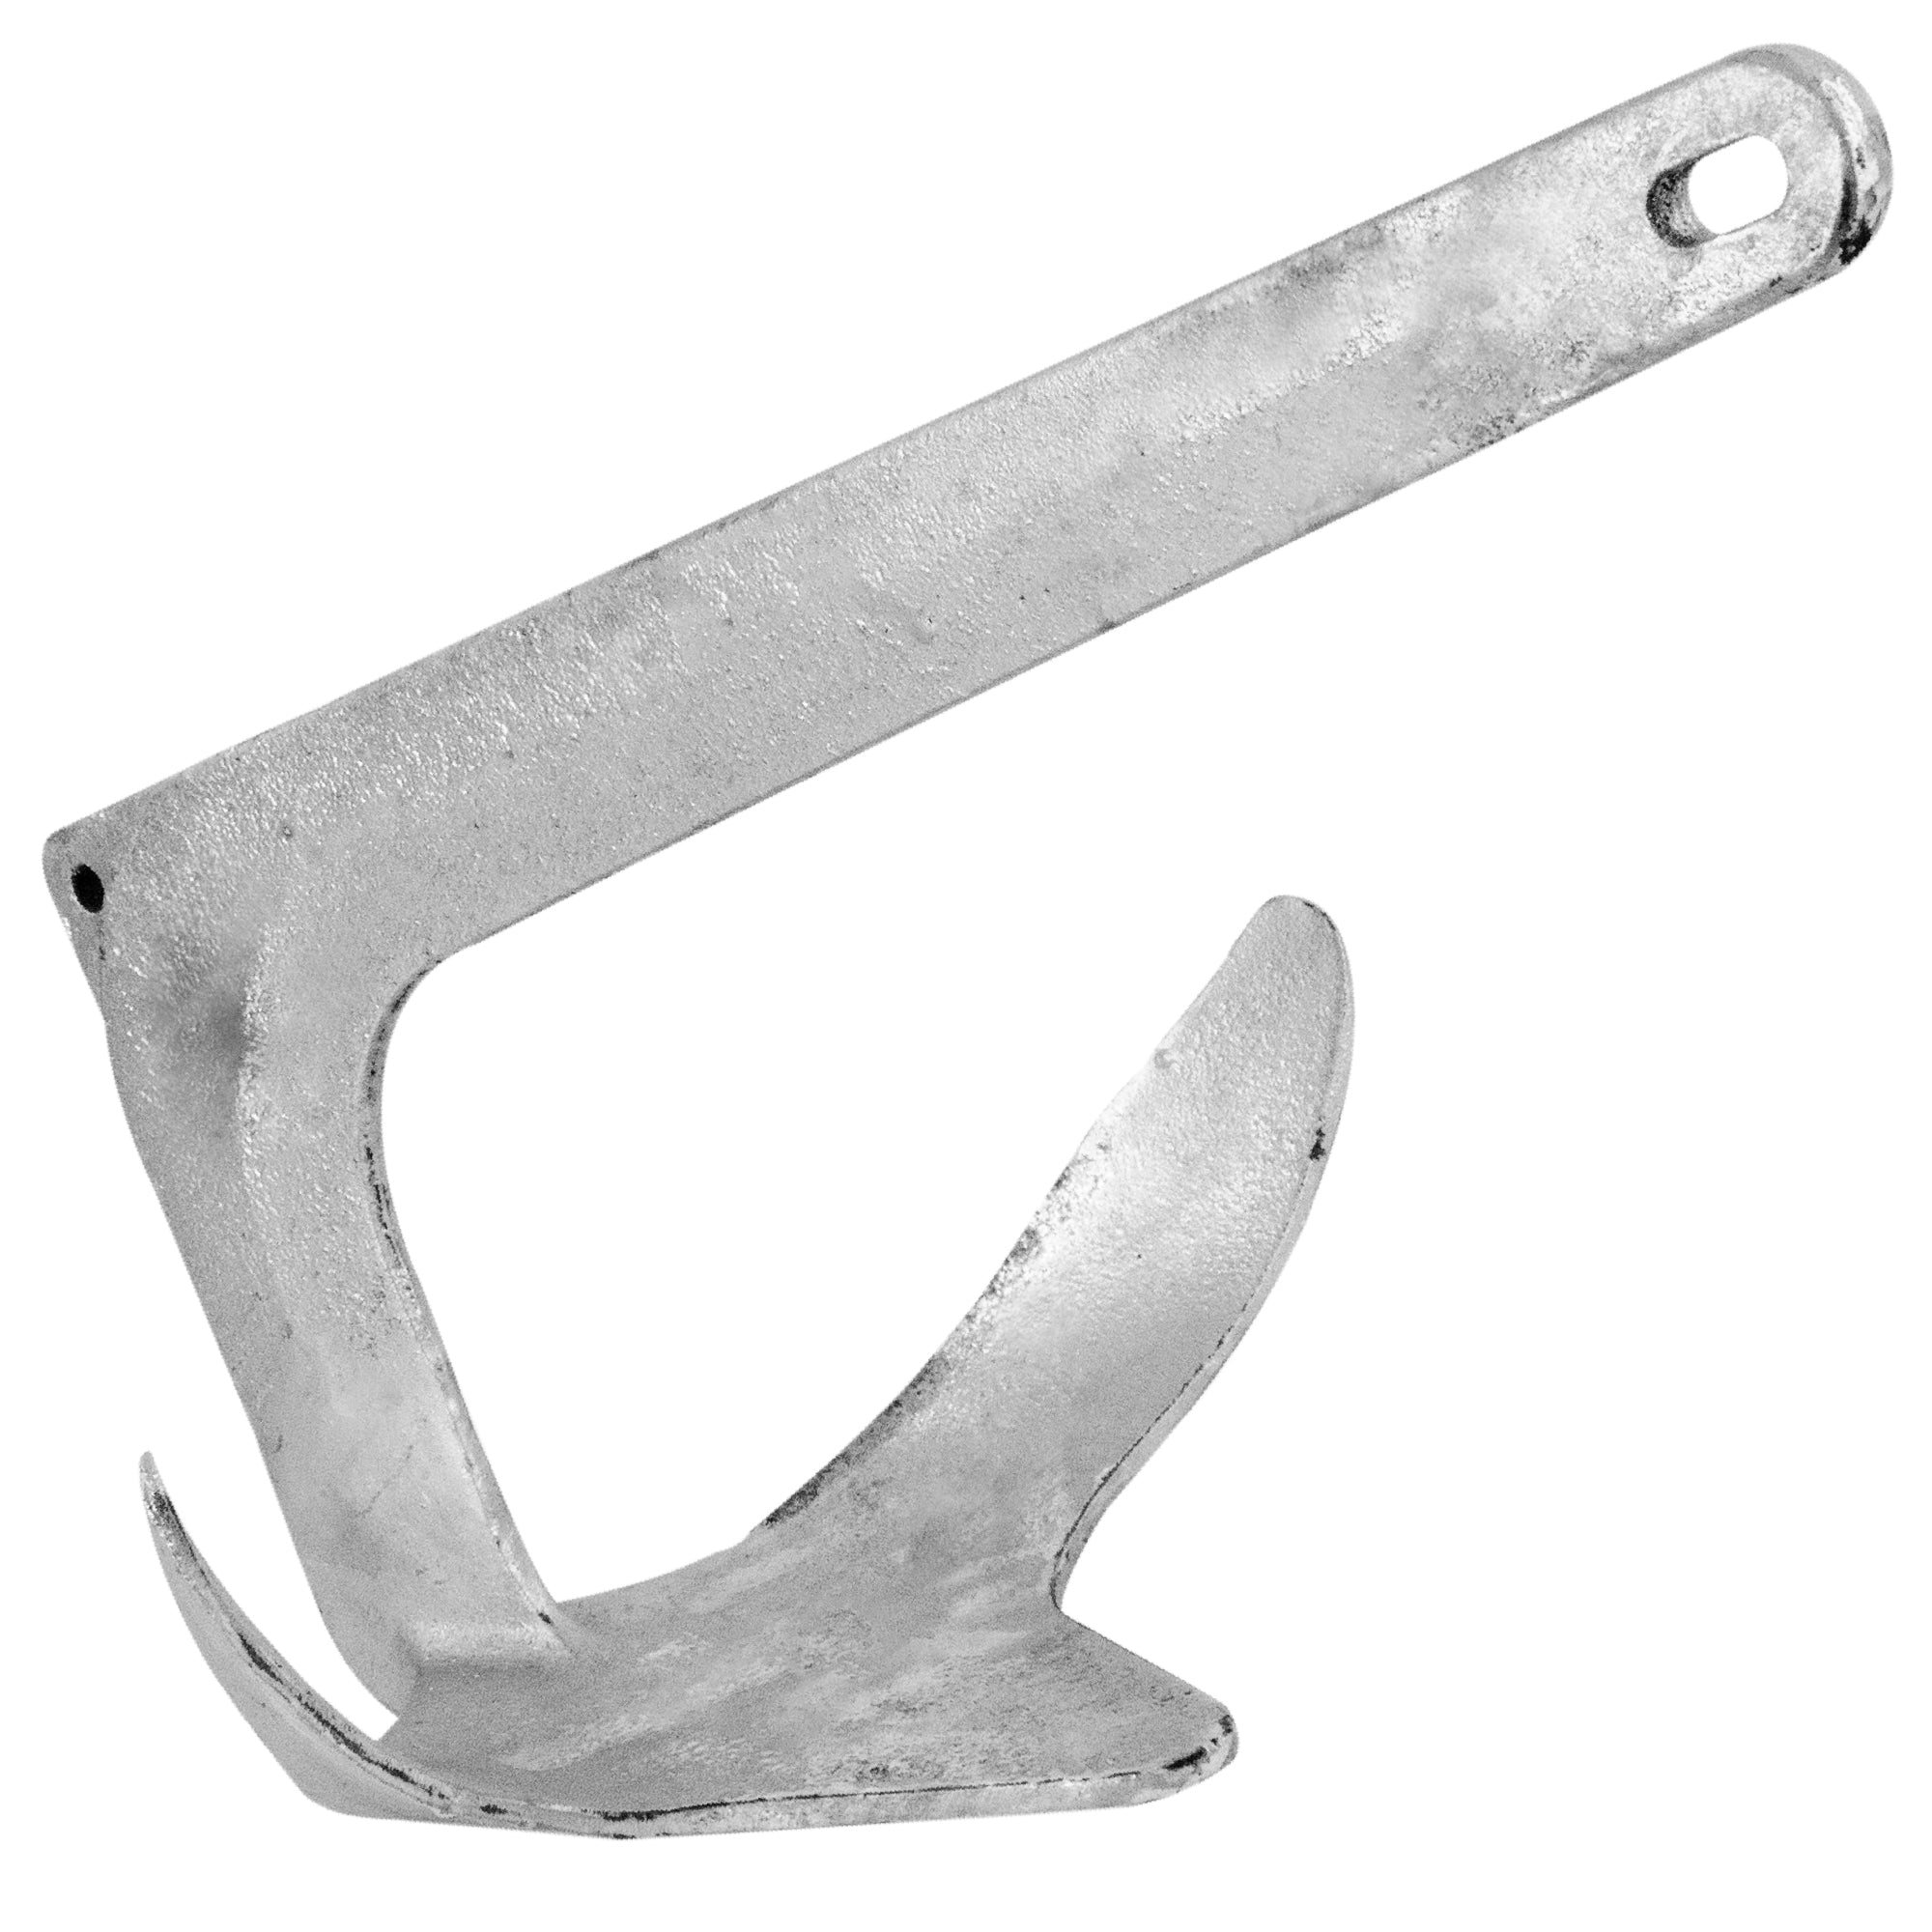 Bruce Style Claw Anchor, 22 Lb / 10 Kg, Hot Dipped Galvanized Steel - FO341